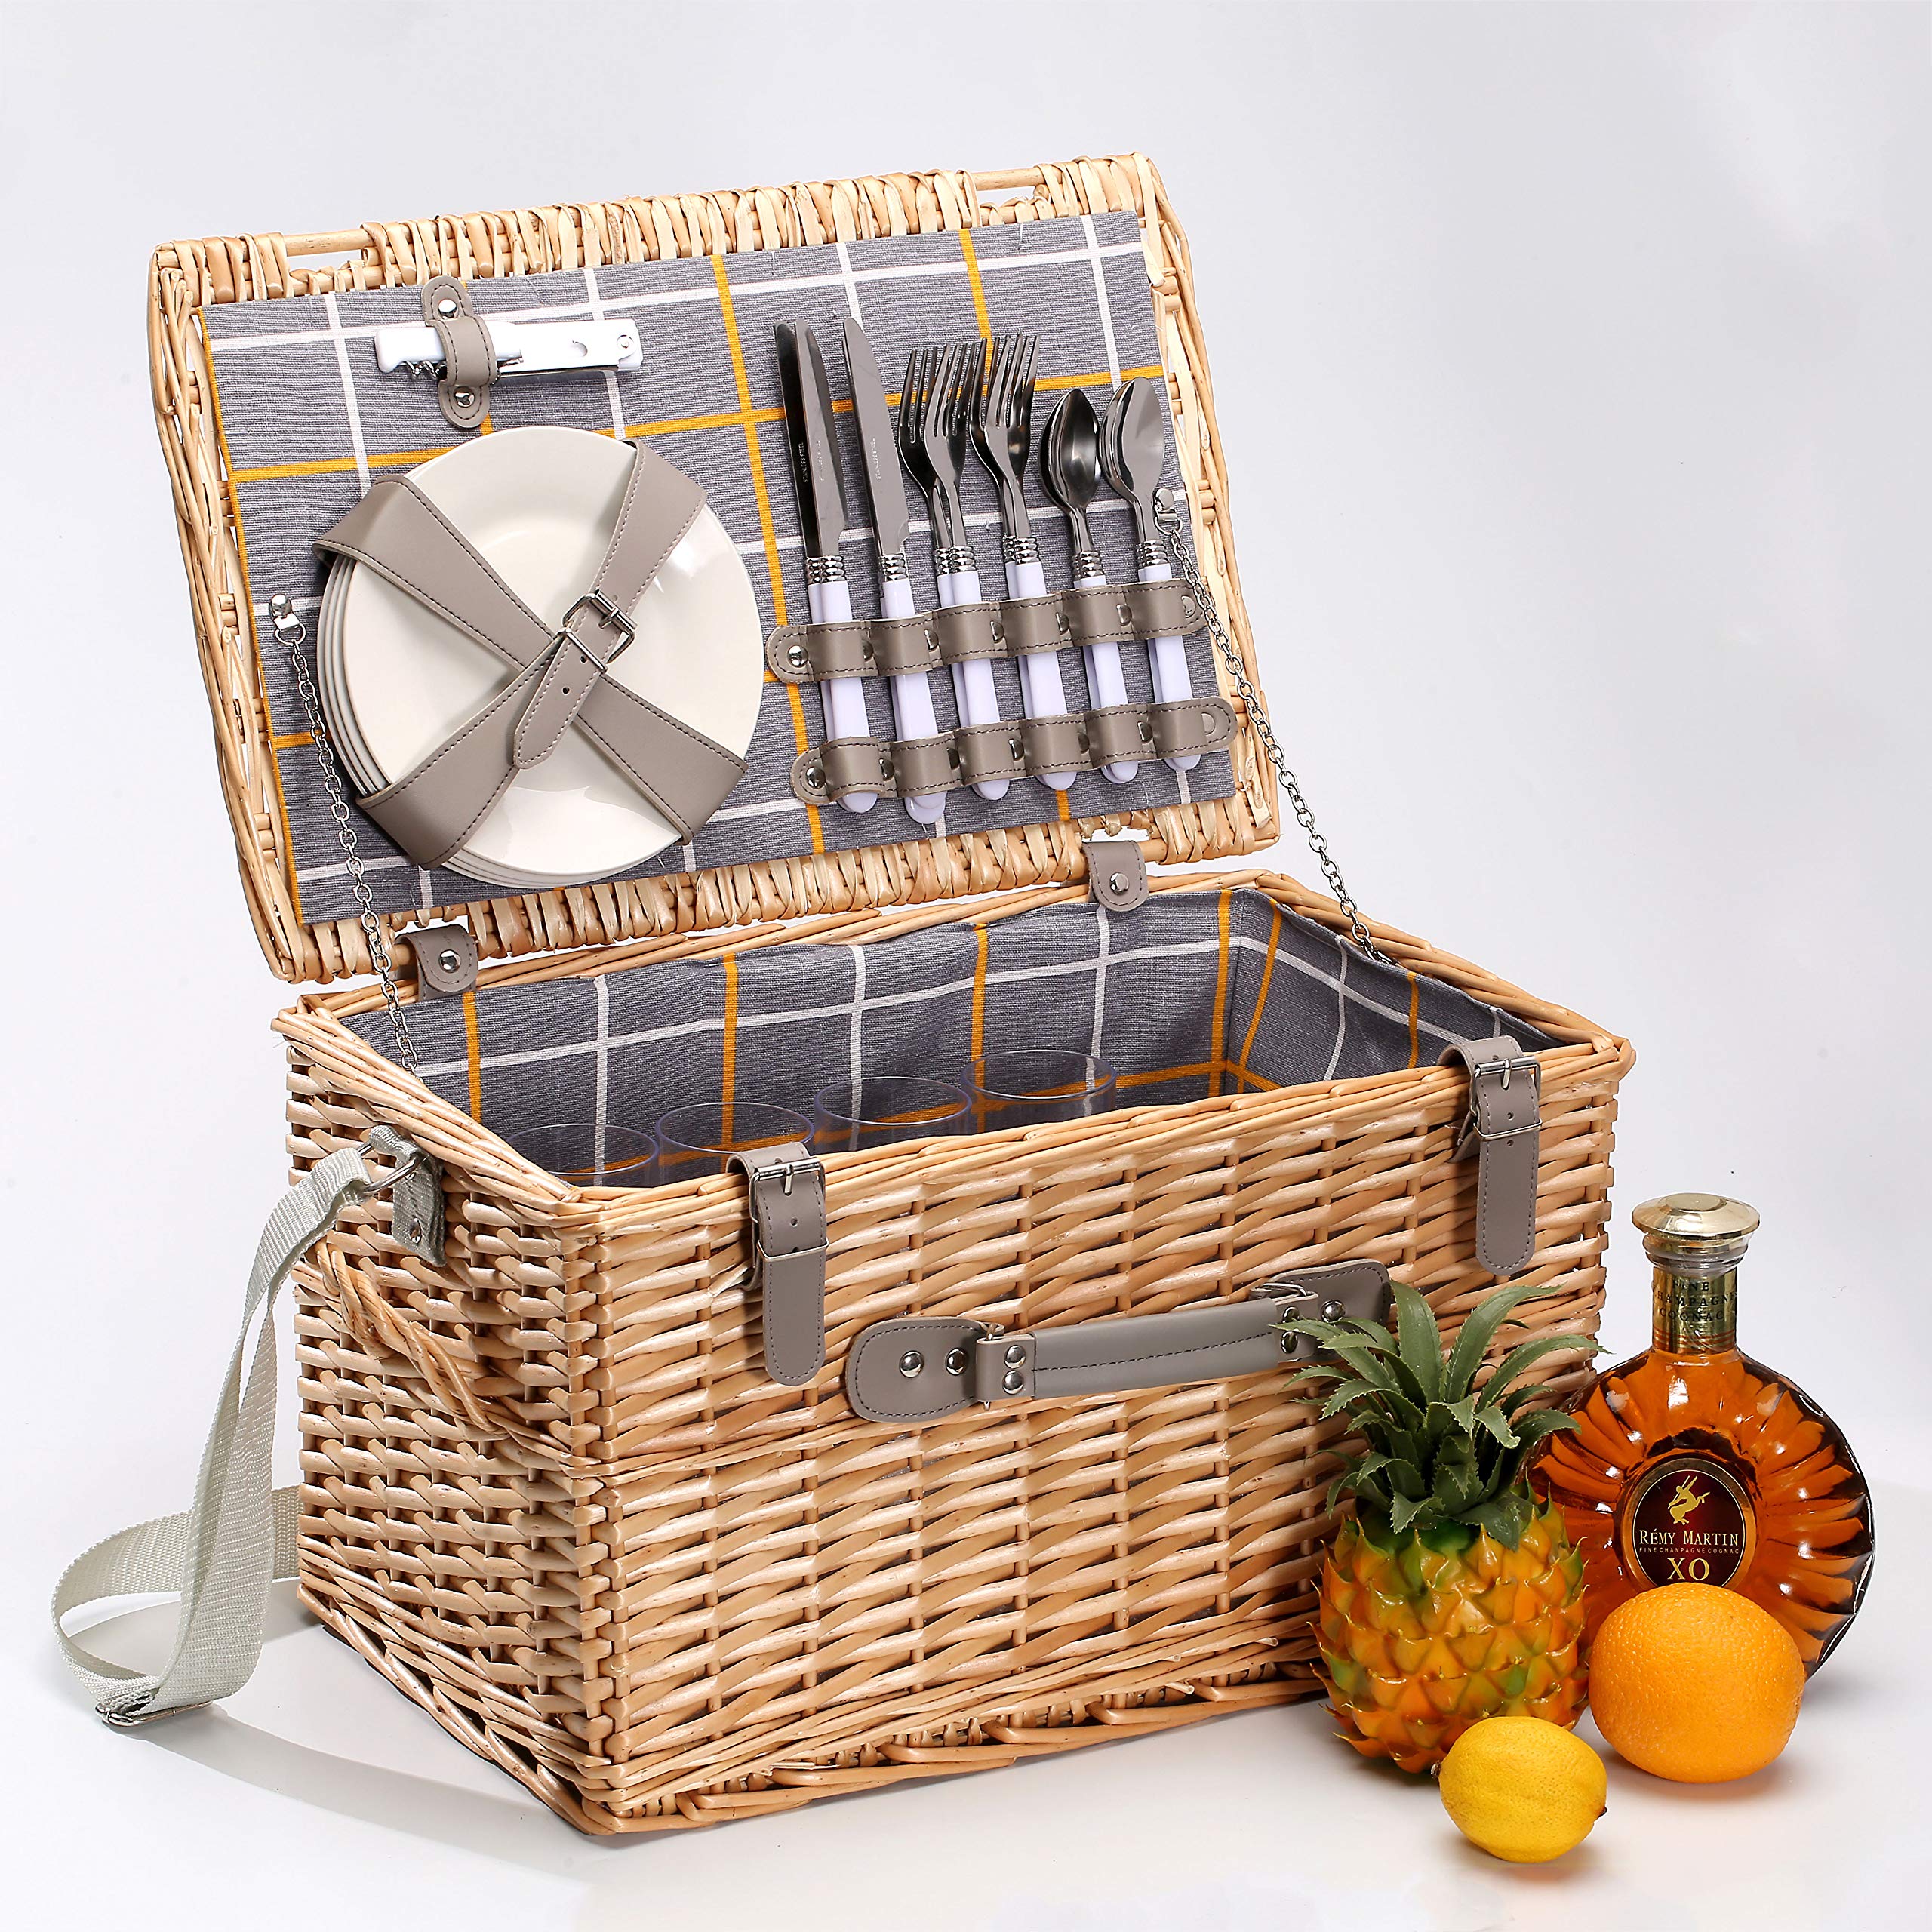 woodluv Willow Picnic Basket For 4 People Complete With Accessories & Easy Carry Handle And Shoulder Carry Strap